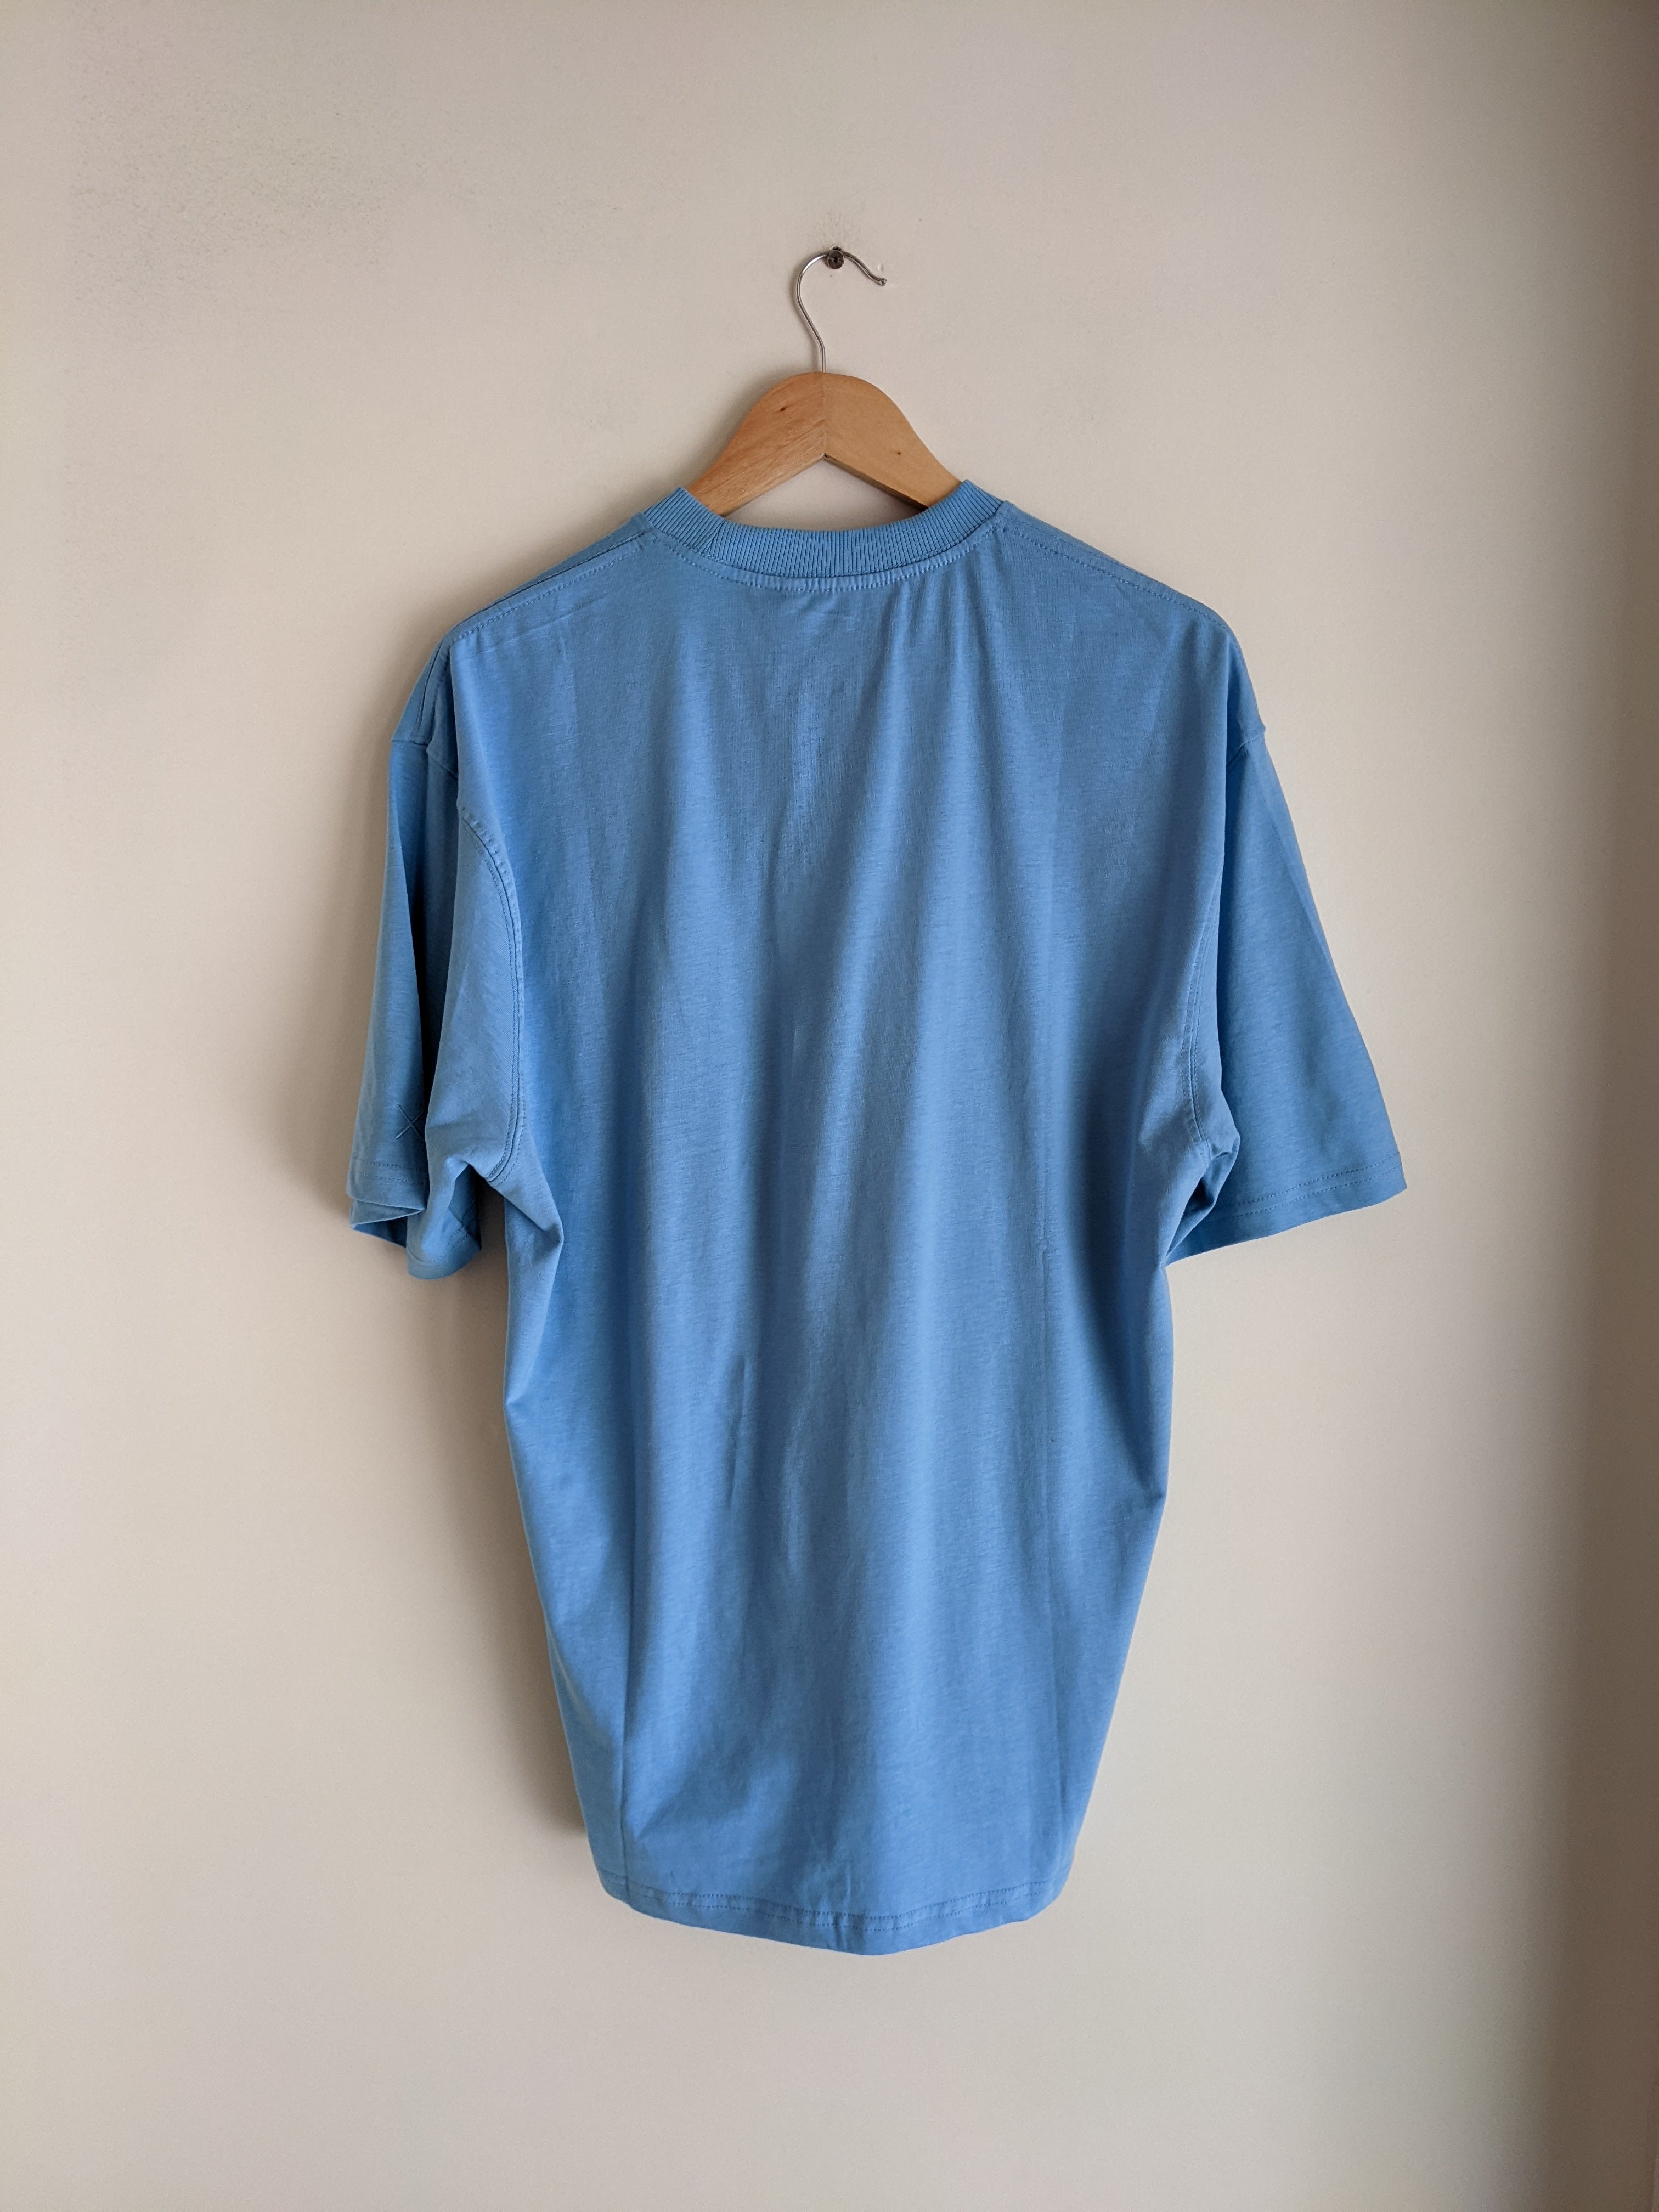 UNIQLO Mickey Mouse Blue Tee